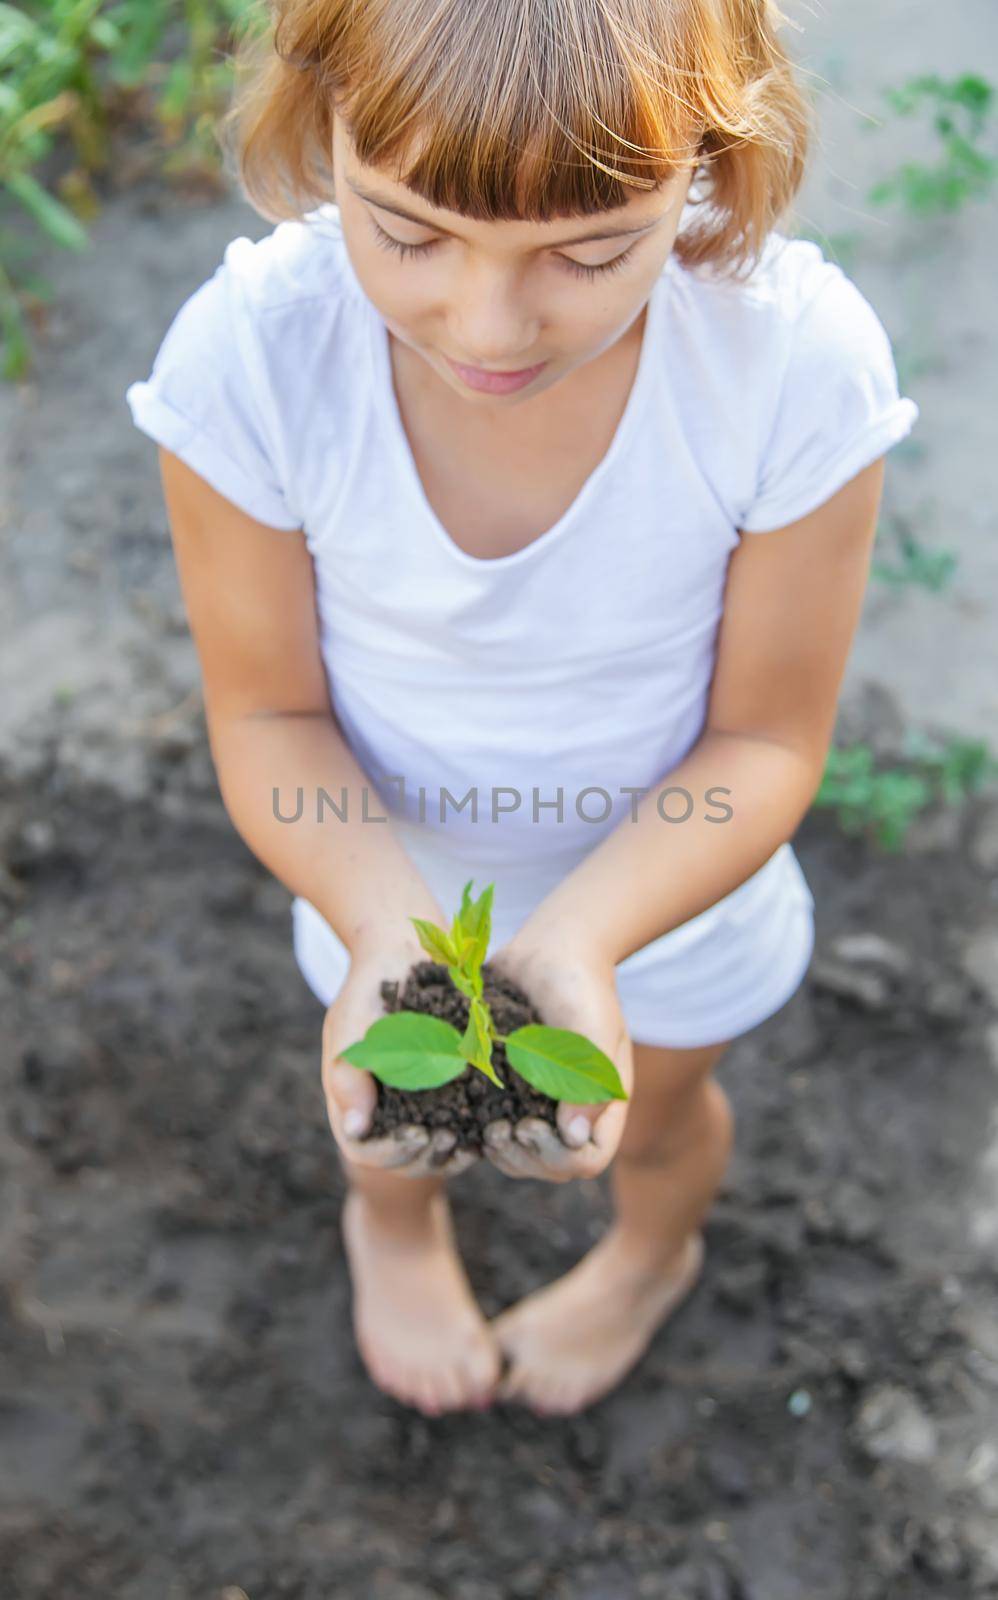 A child in the garden plants a plant. Selective focus. by yanadjana